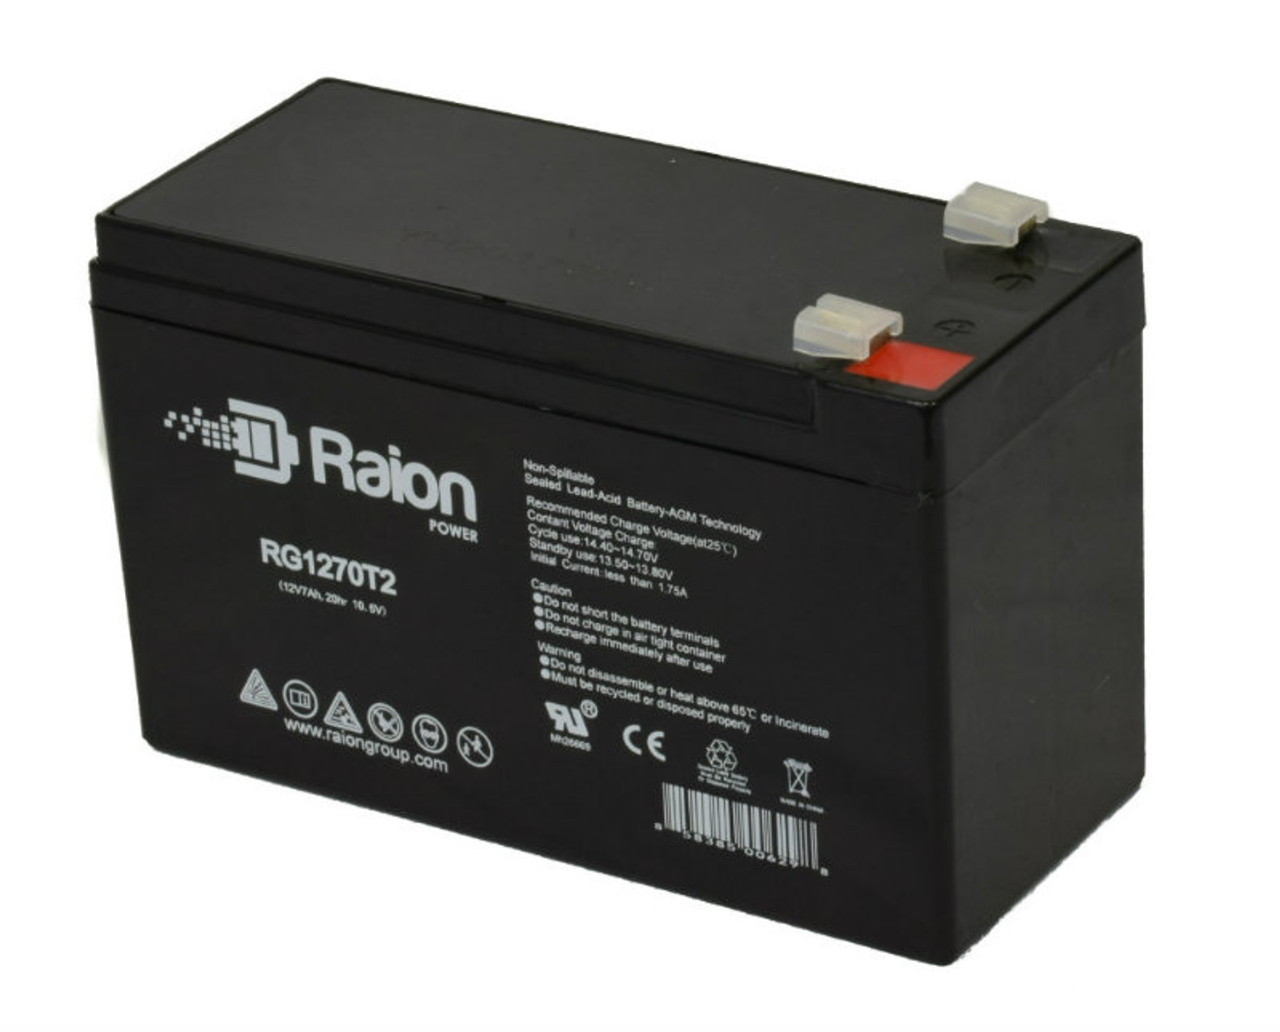 Raion Power Replacement 12V 7Ah Battery for Medical Data Prism SE Monitor - 1 Pack